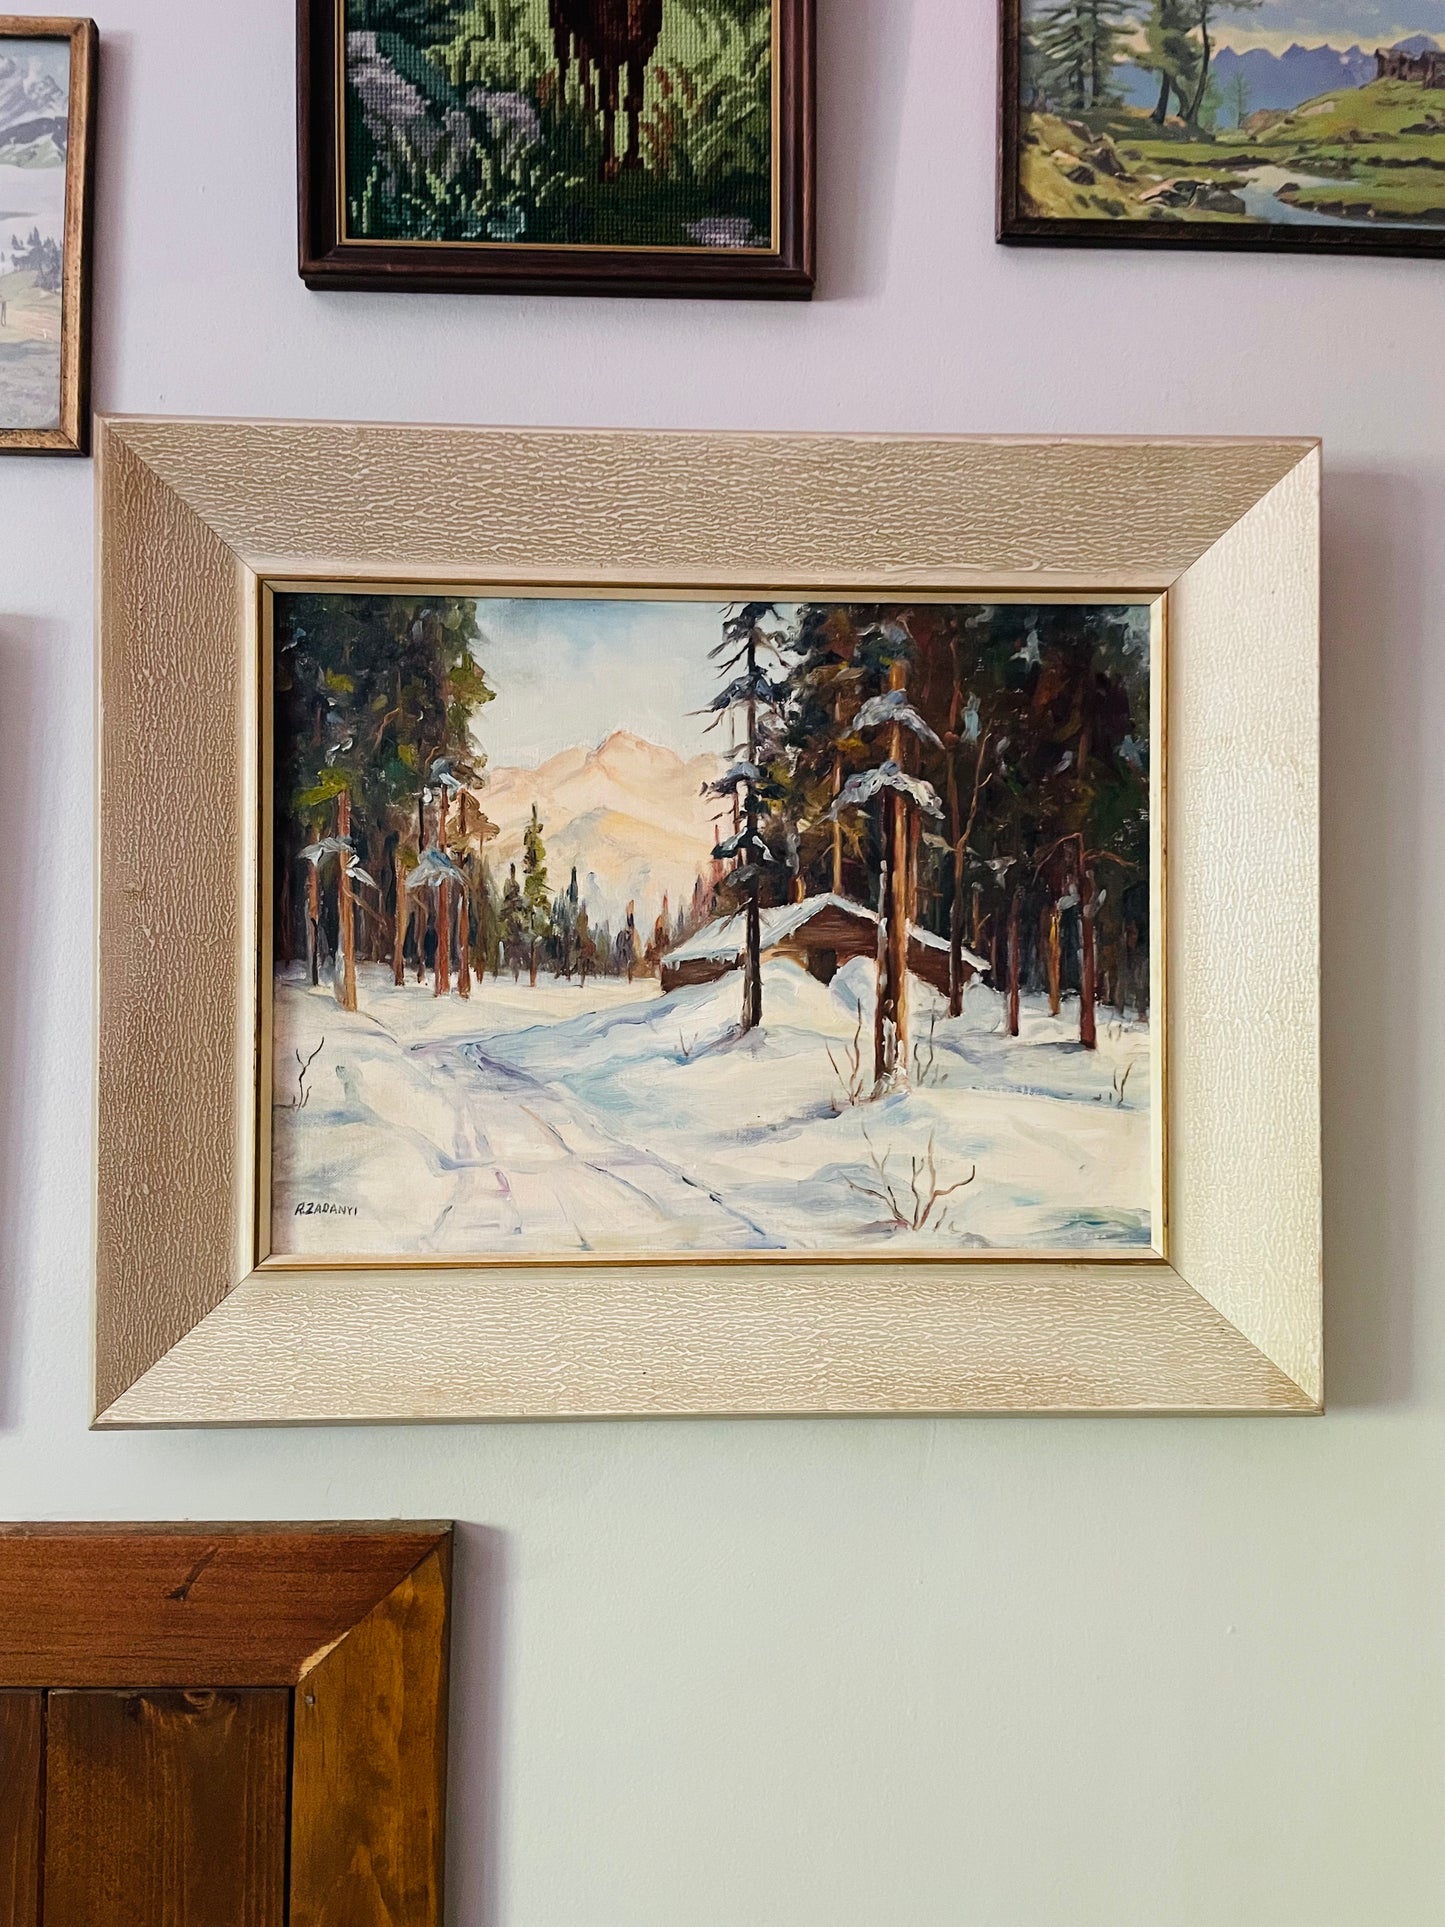 Original Art - Large Framed Painting of Snowy Cabin in Woods with Mountains - Signed R. Zadanyi